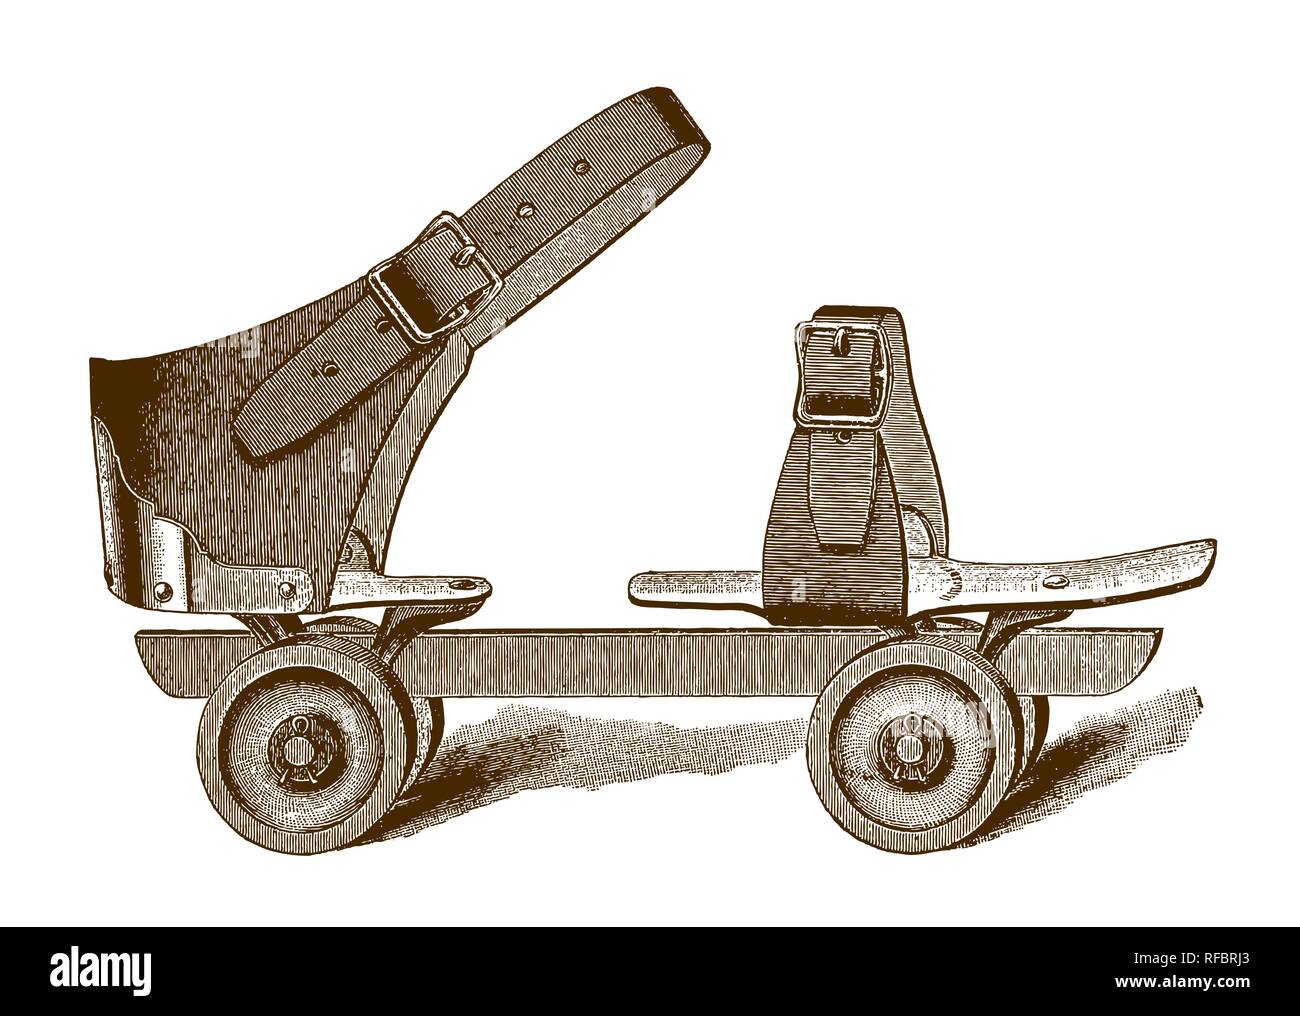 Historic sidewalk roller skate (after an engraving or etching from the 19th century) Stock Vector